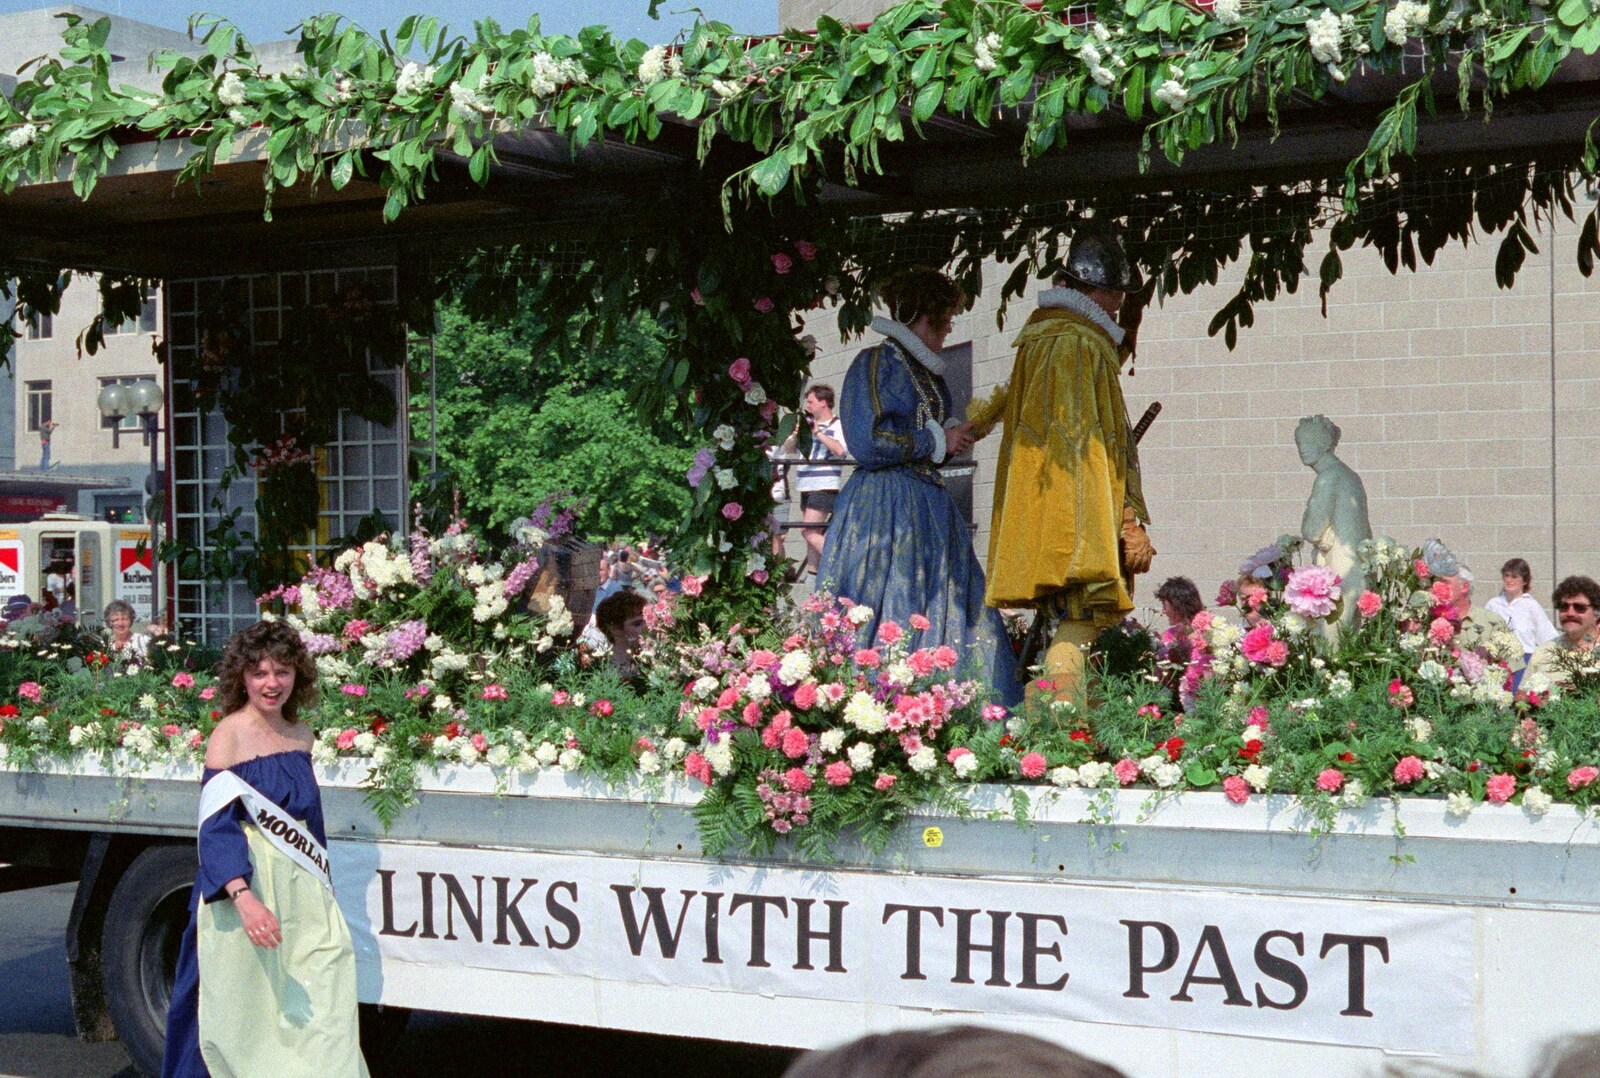 A float of flowers from Chantal and Andy's Wedding, and the Lord Mayor's Parade, Plymouth - 20th May 1987